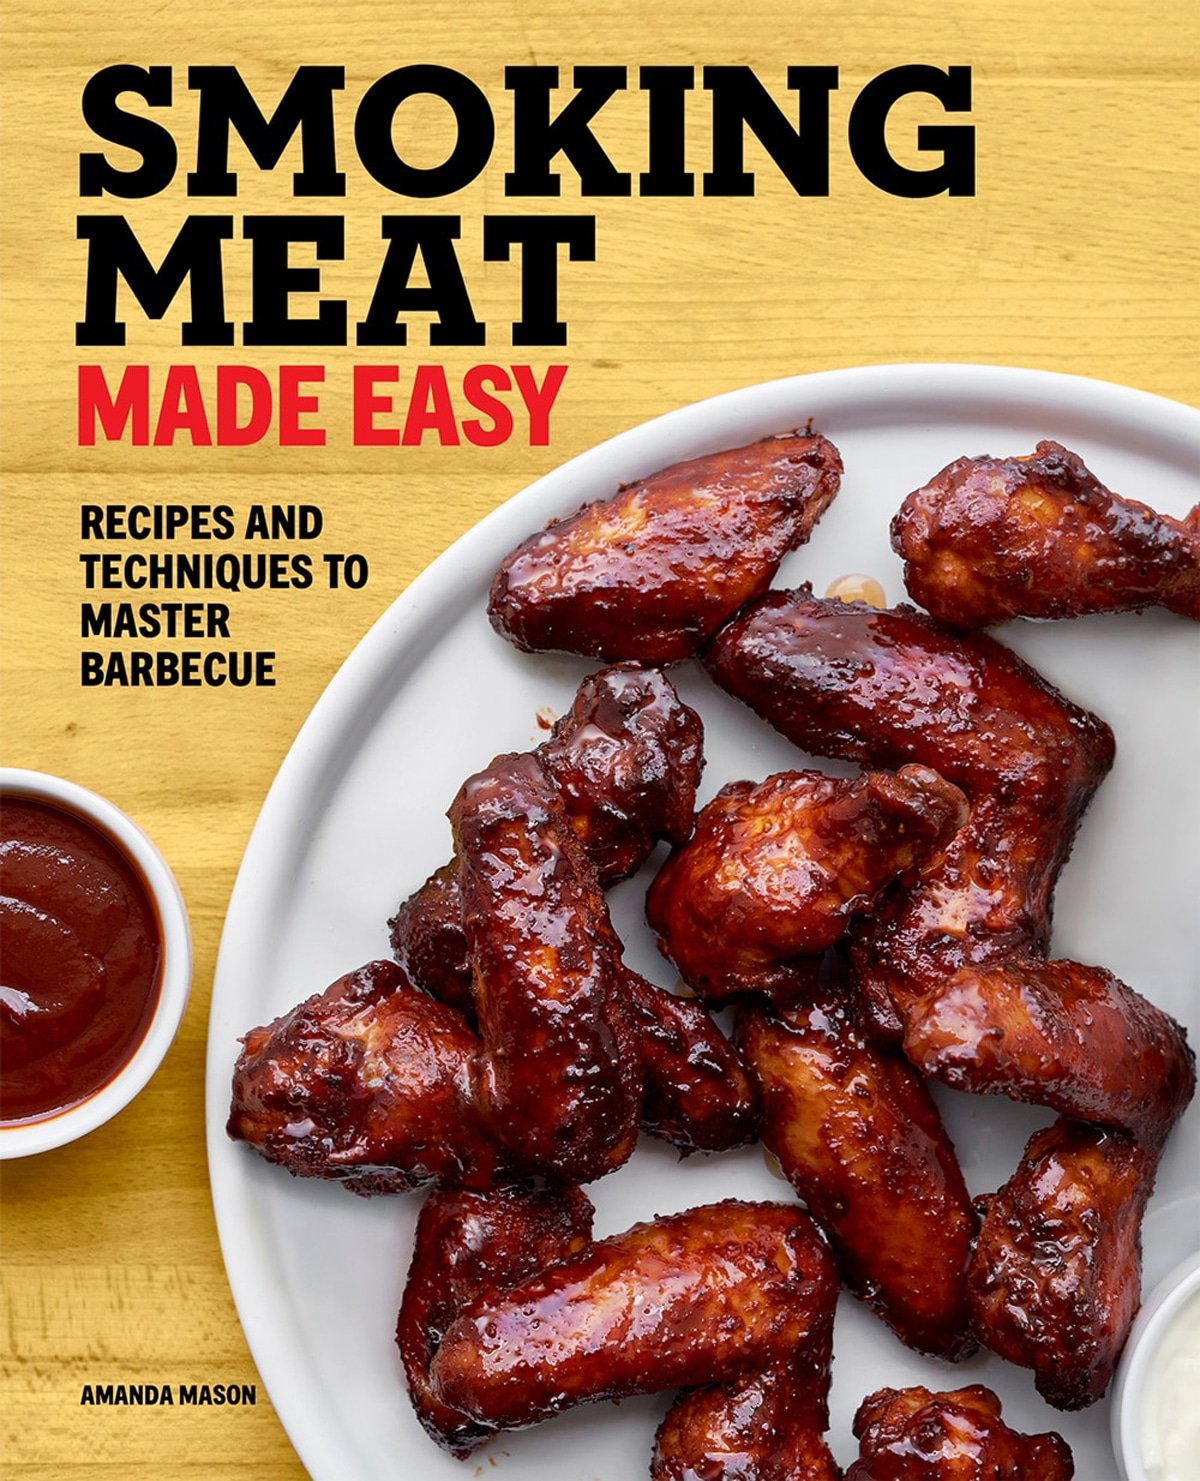 The cover of a Smoking Meat Made Easy cookbook.